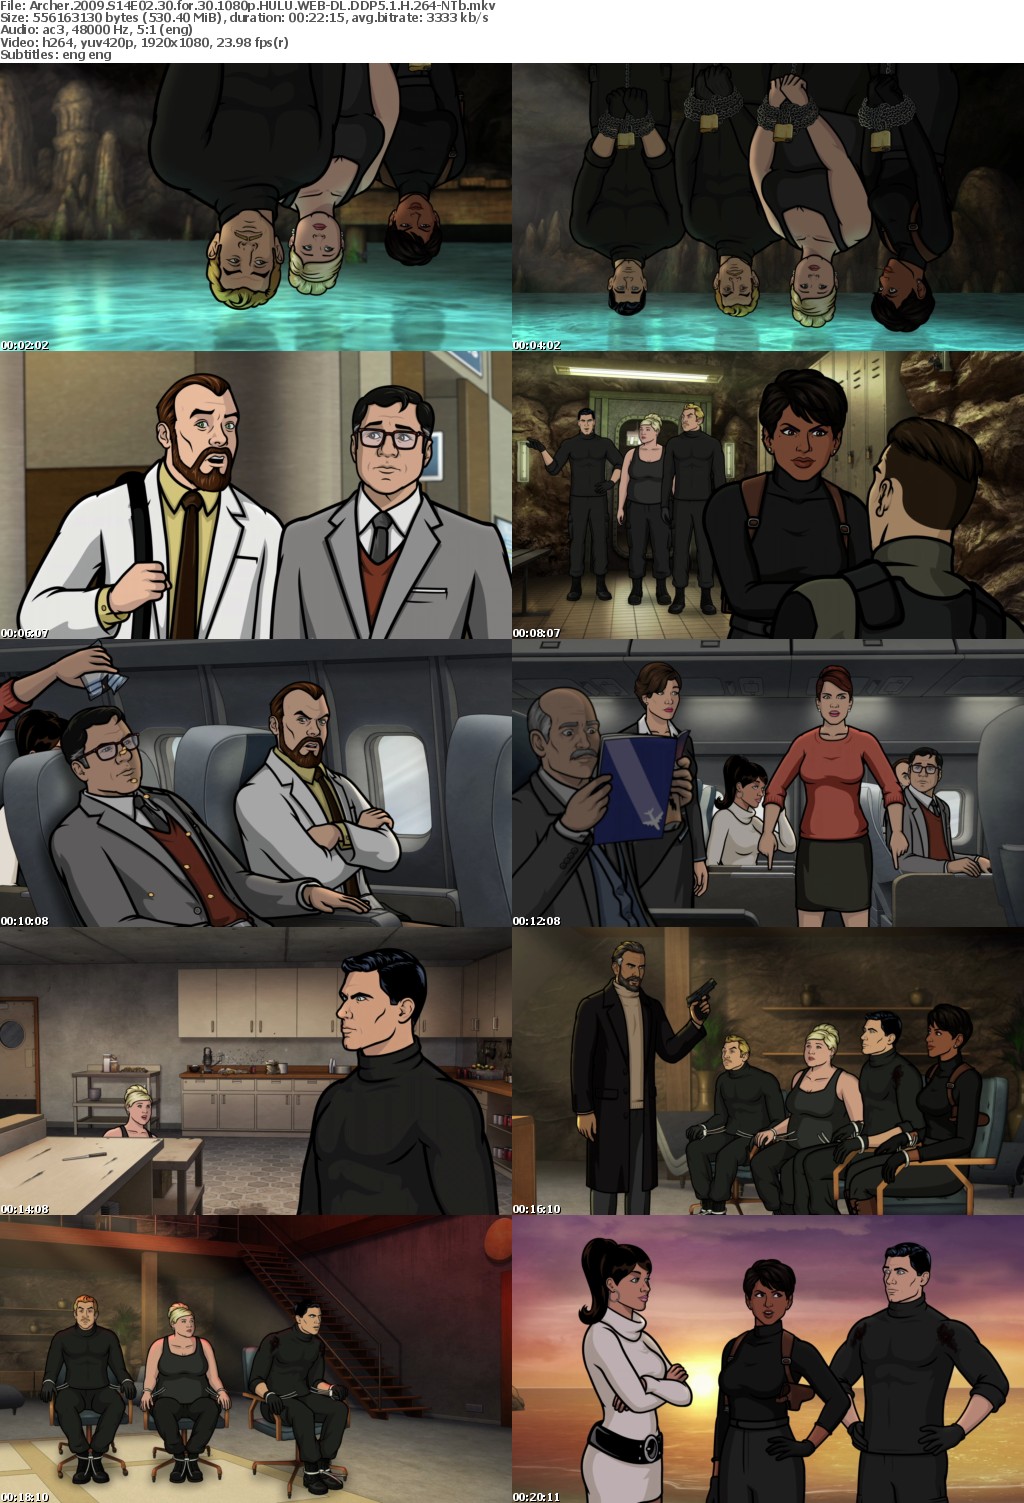 Archer 2009 S14E02 30 for 30 1080p HULU WEB-DL DDP5 1 H 264-NTb